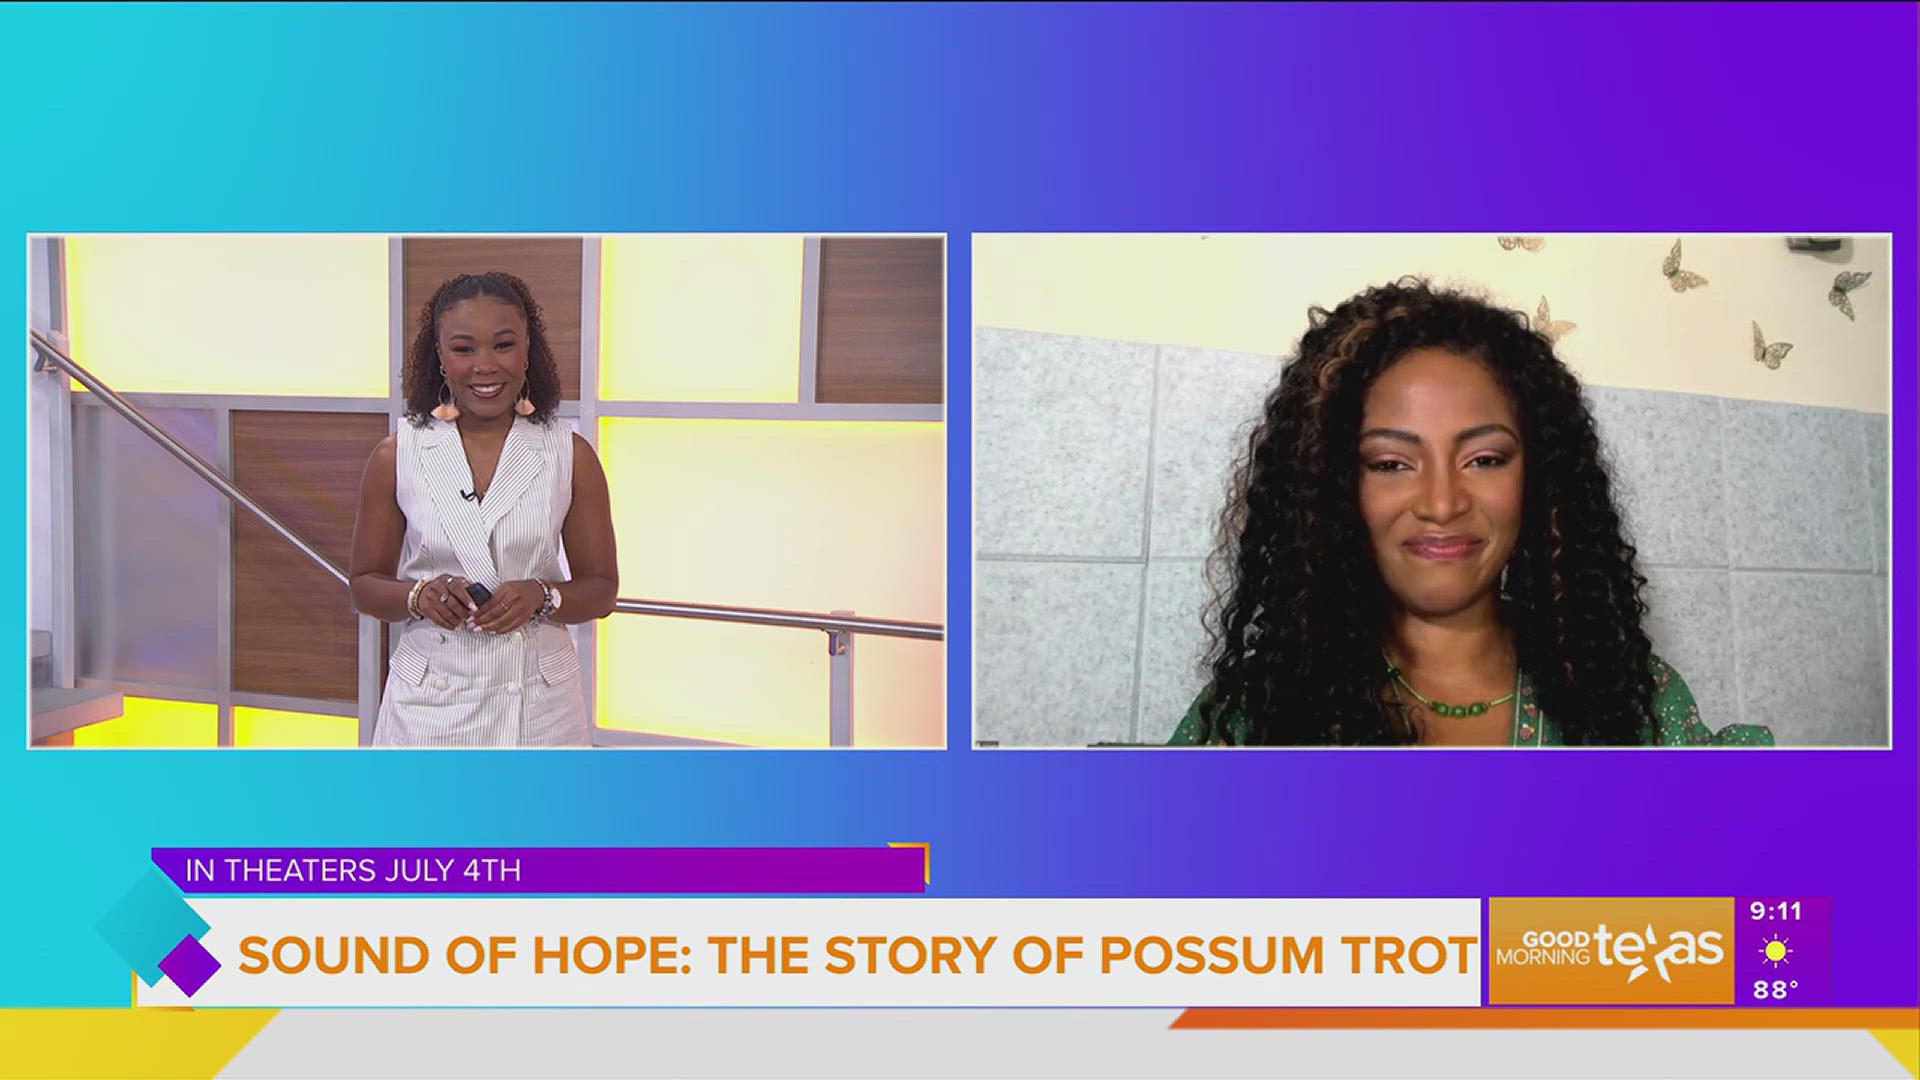 Actress and Filmmaker Jillian Reeves shares her role in the movie "Sounds of Hope: The Story of Possum Trot" which tells a story that takes place in East Texas.